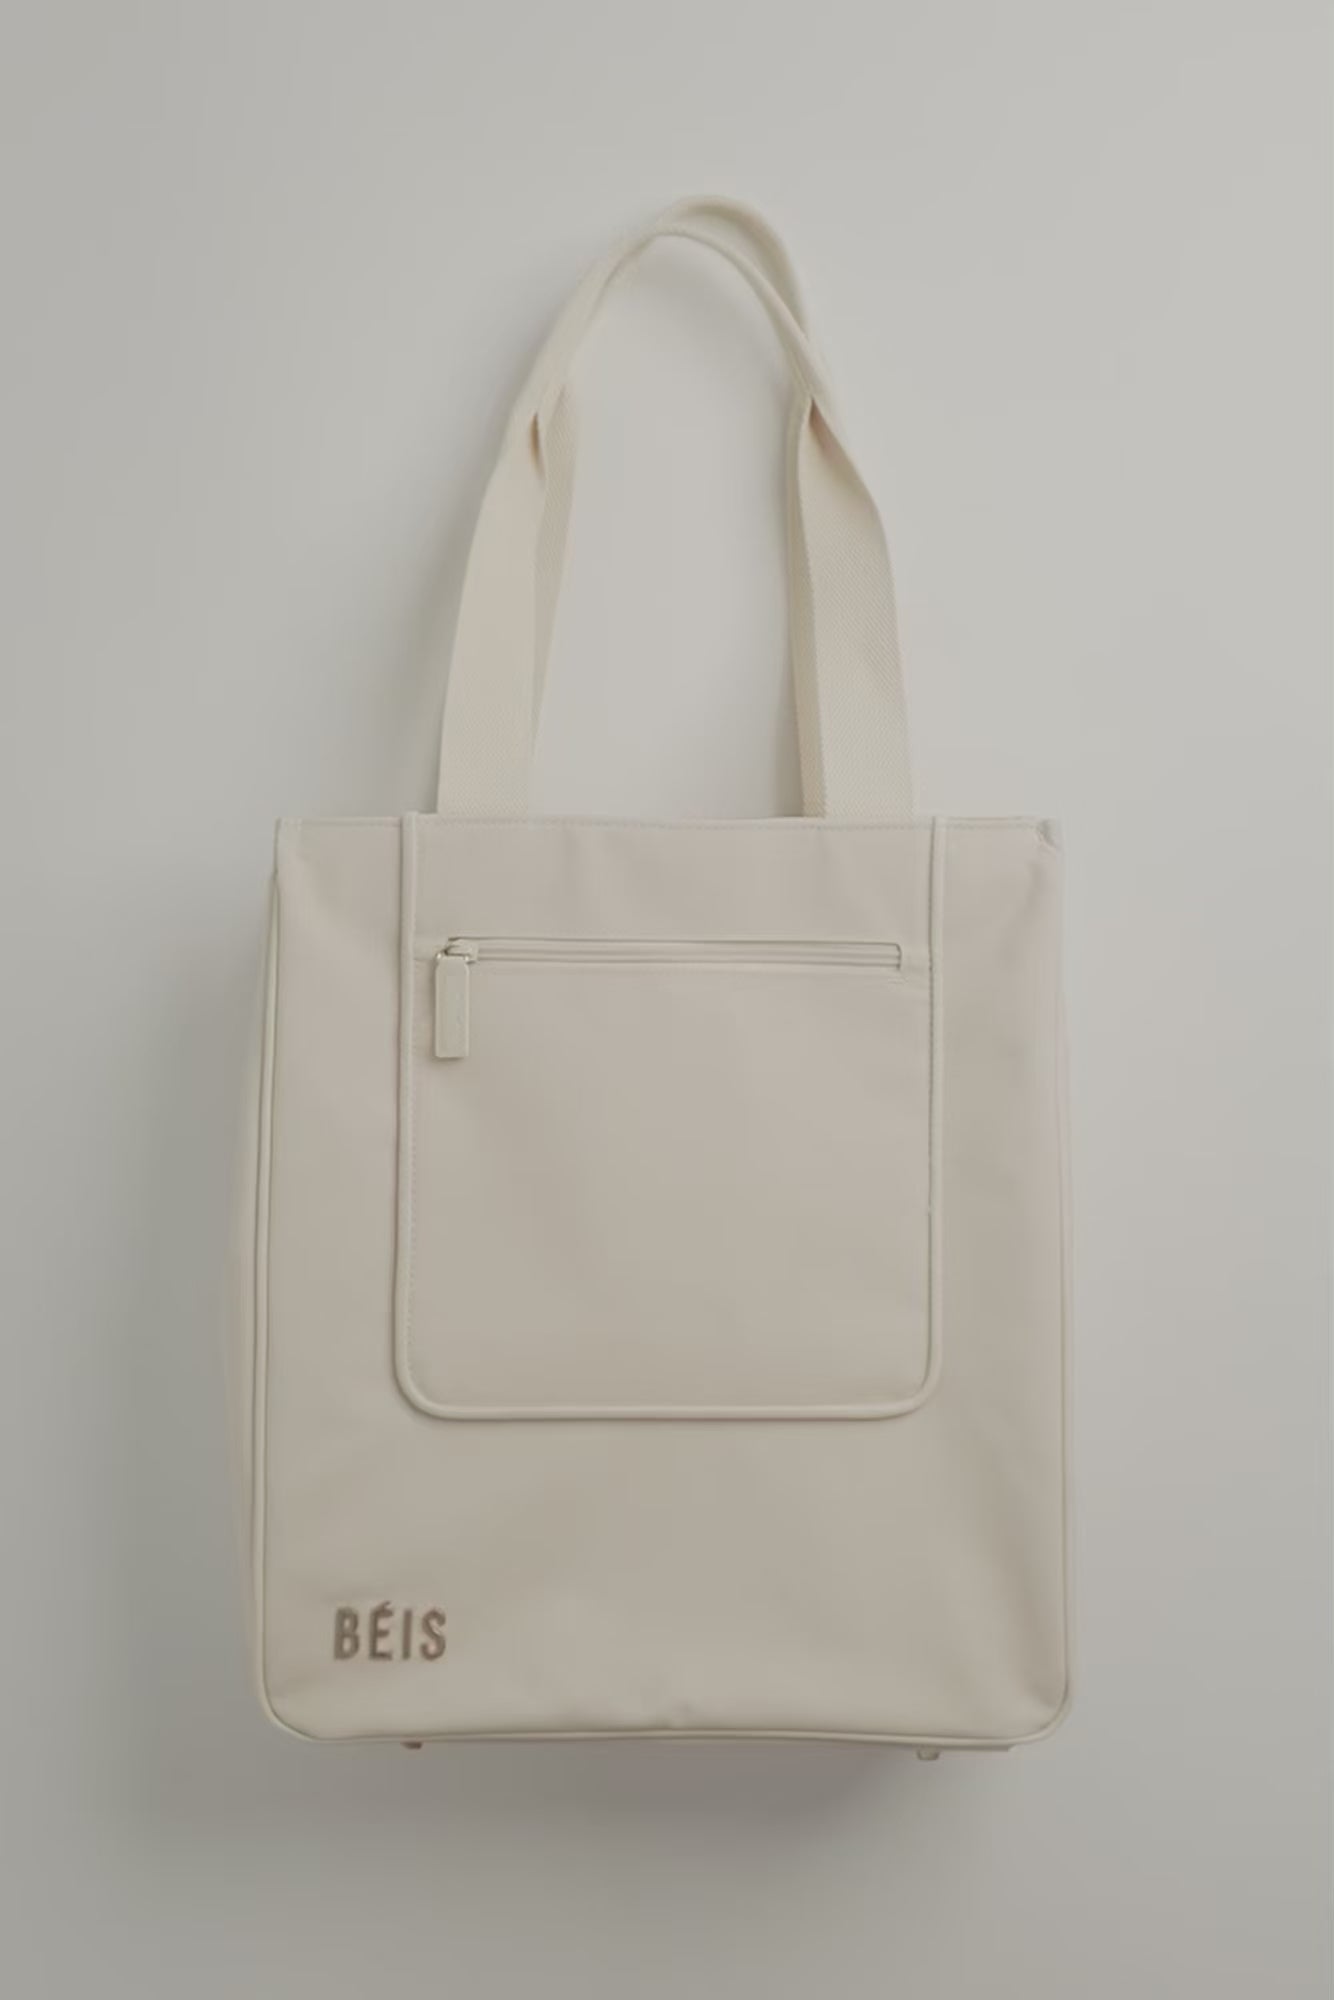 Béis 'The BEISICS Tote' in Black - Large Black Tote Bag with Zipper